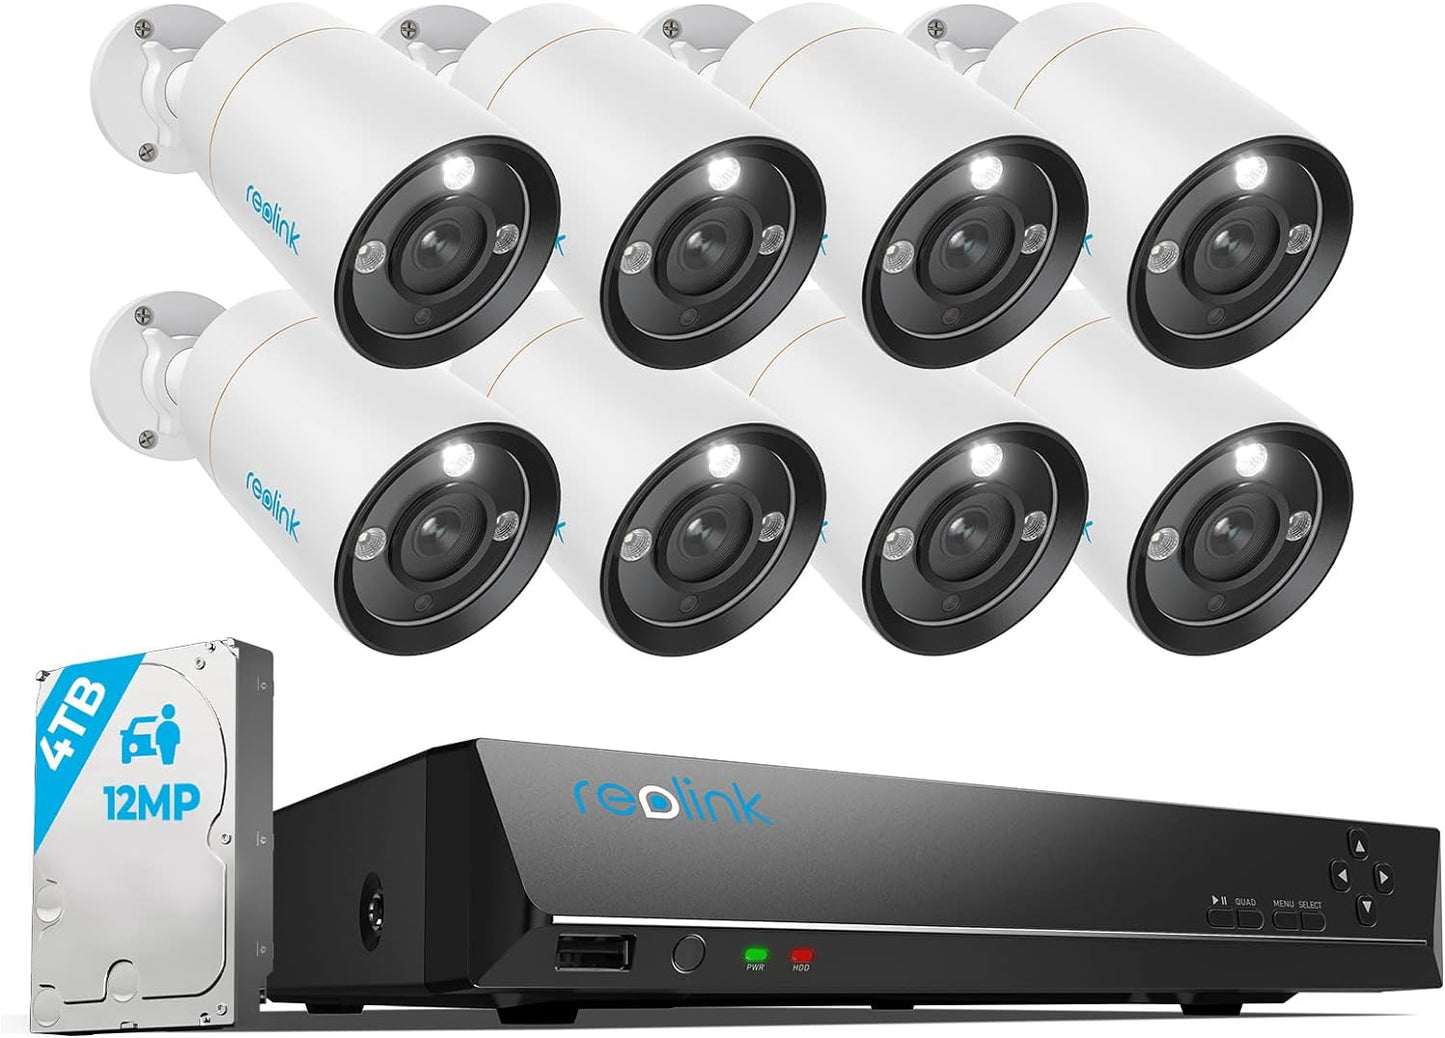 Reolink 12MP Outdoor Surveillance Camera Set, 8 x PoE IP Camera Surveillance Outdoor, 16CH 4TB HDD NVR, Spotlights, Person/Vehicle Detection, 2-Way Audio, 24/7 Colour/IR Night Vision, RLK16-1200D8-A